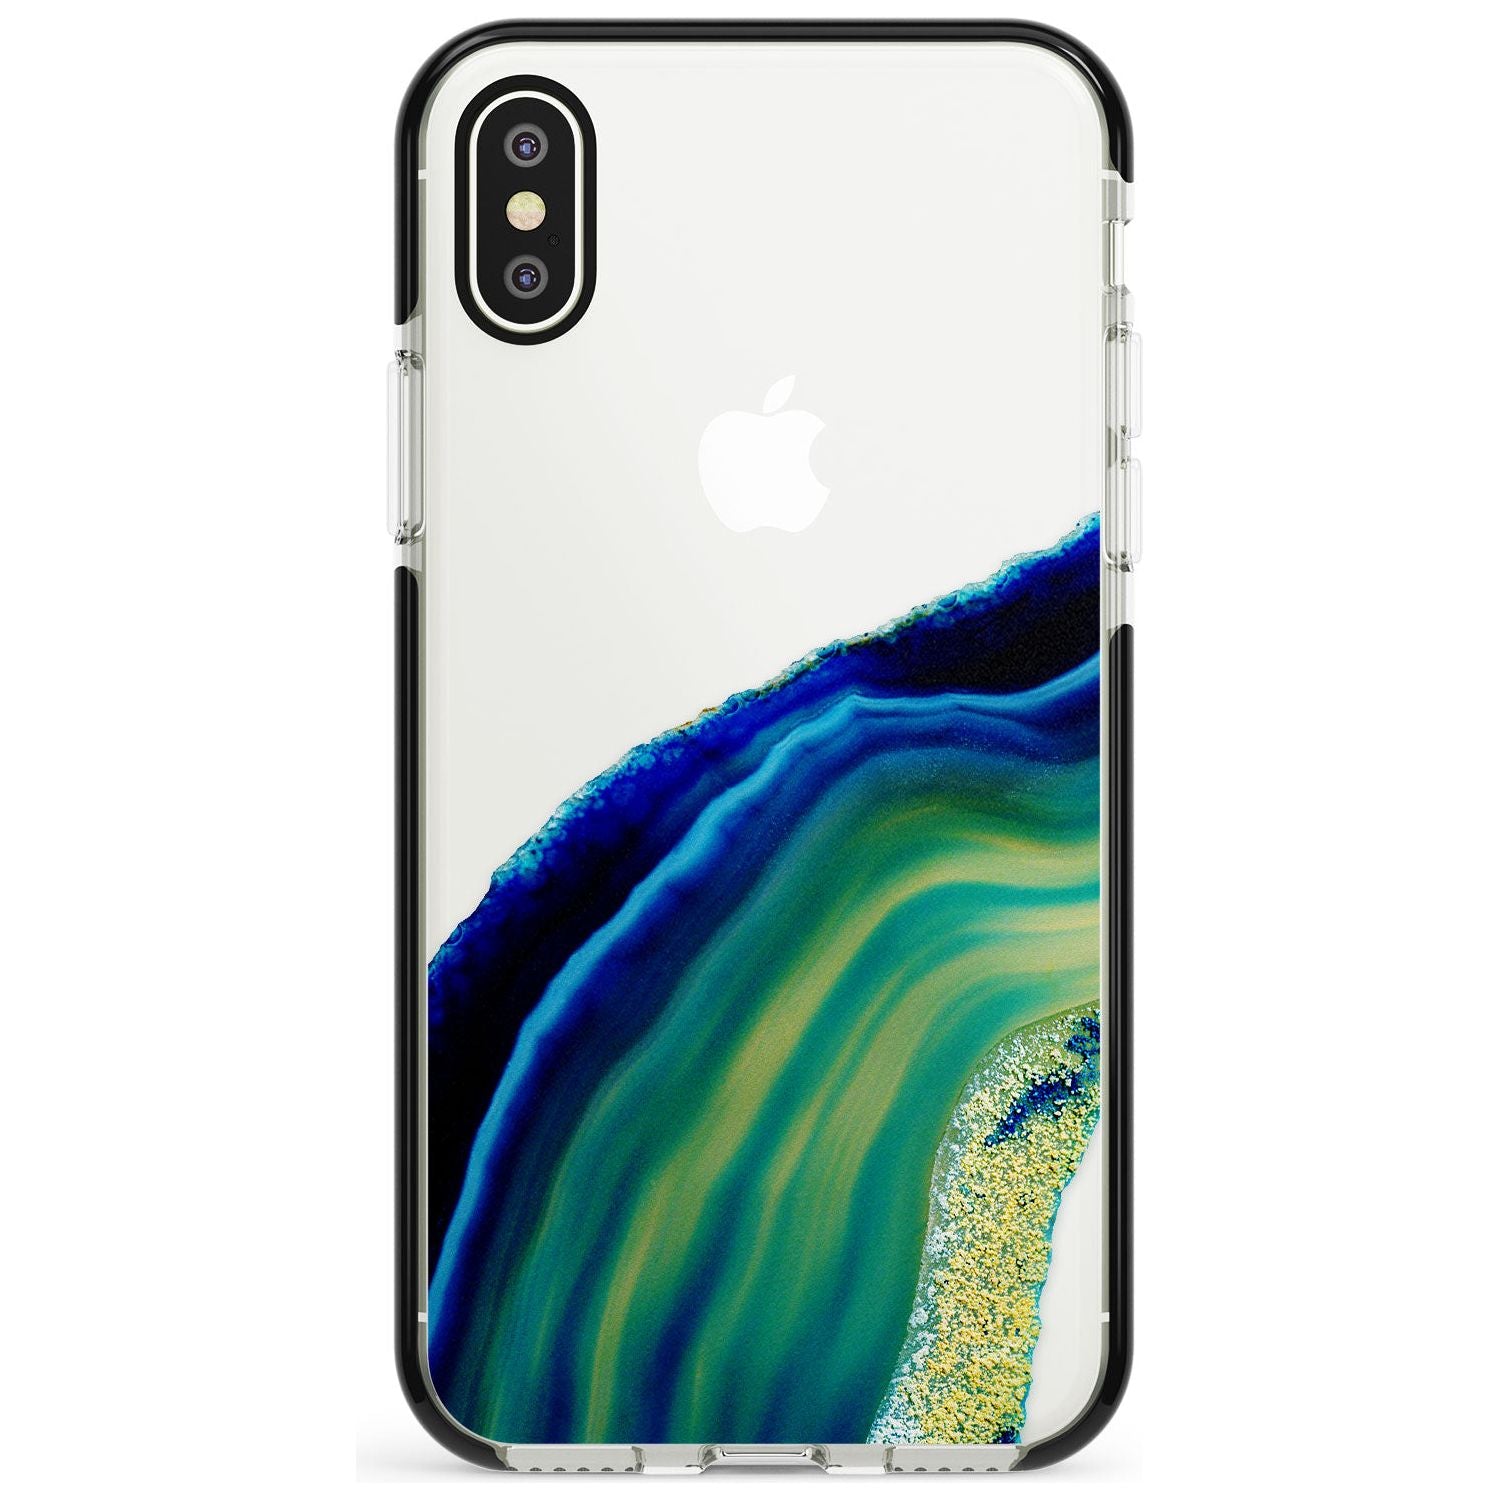 Green & Blue Gemstone Crystal Black Impact Phone Case for iPhone X XS Max XR